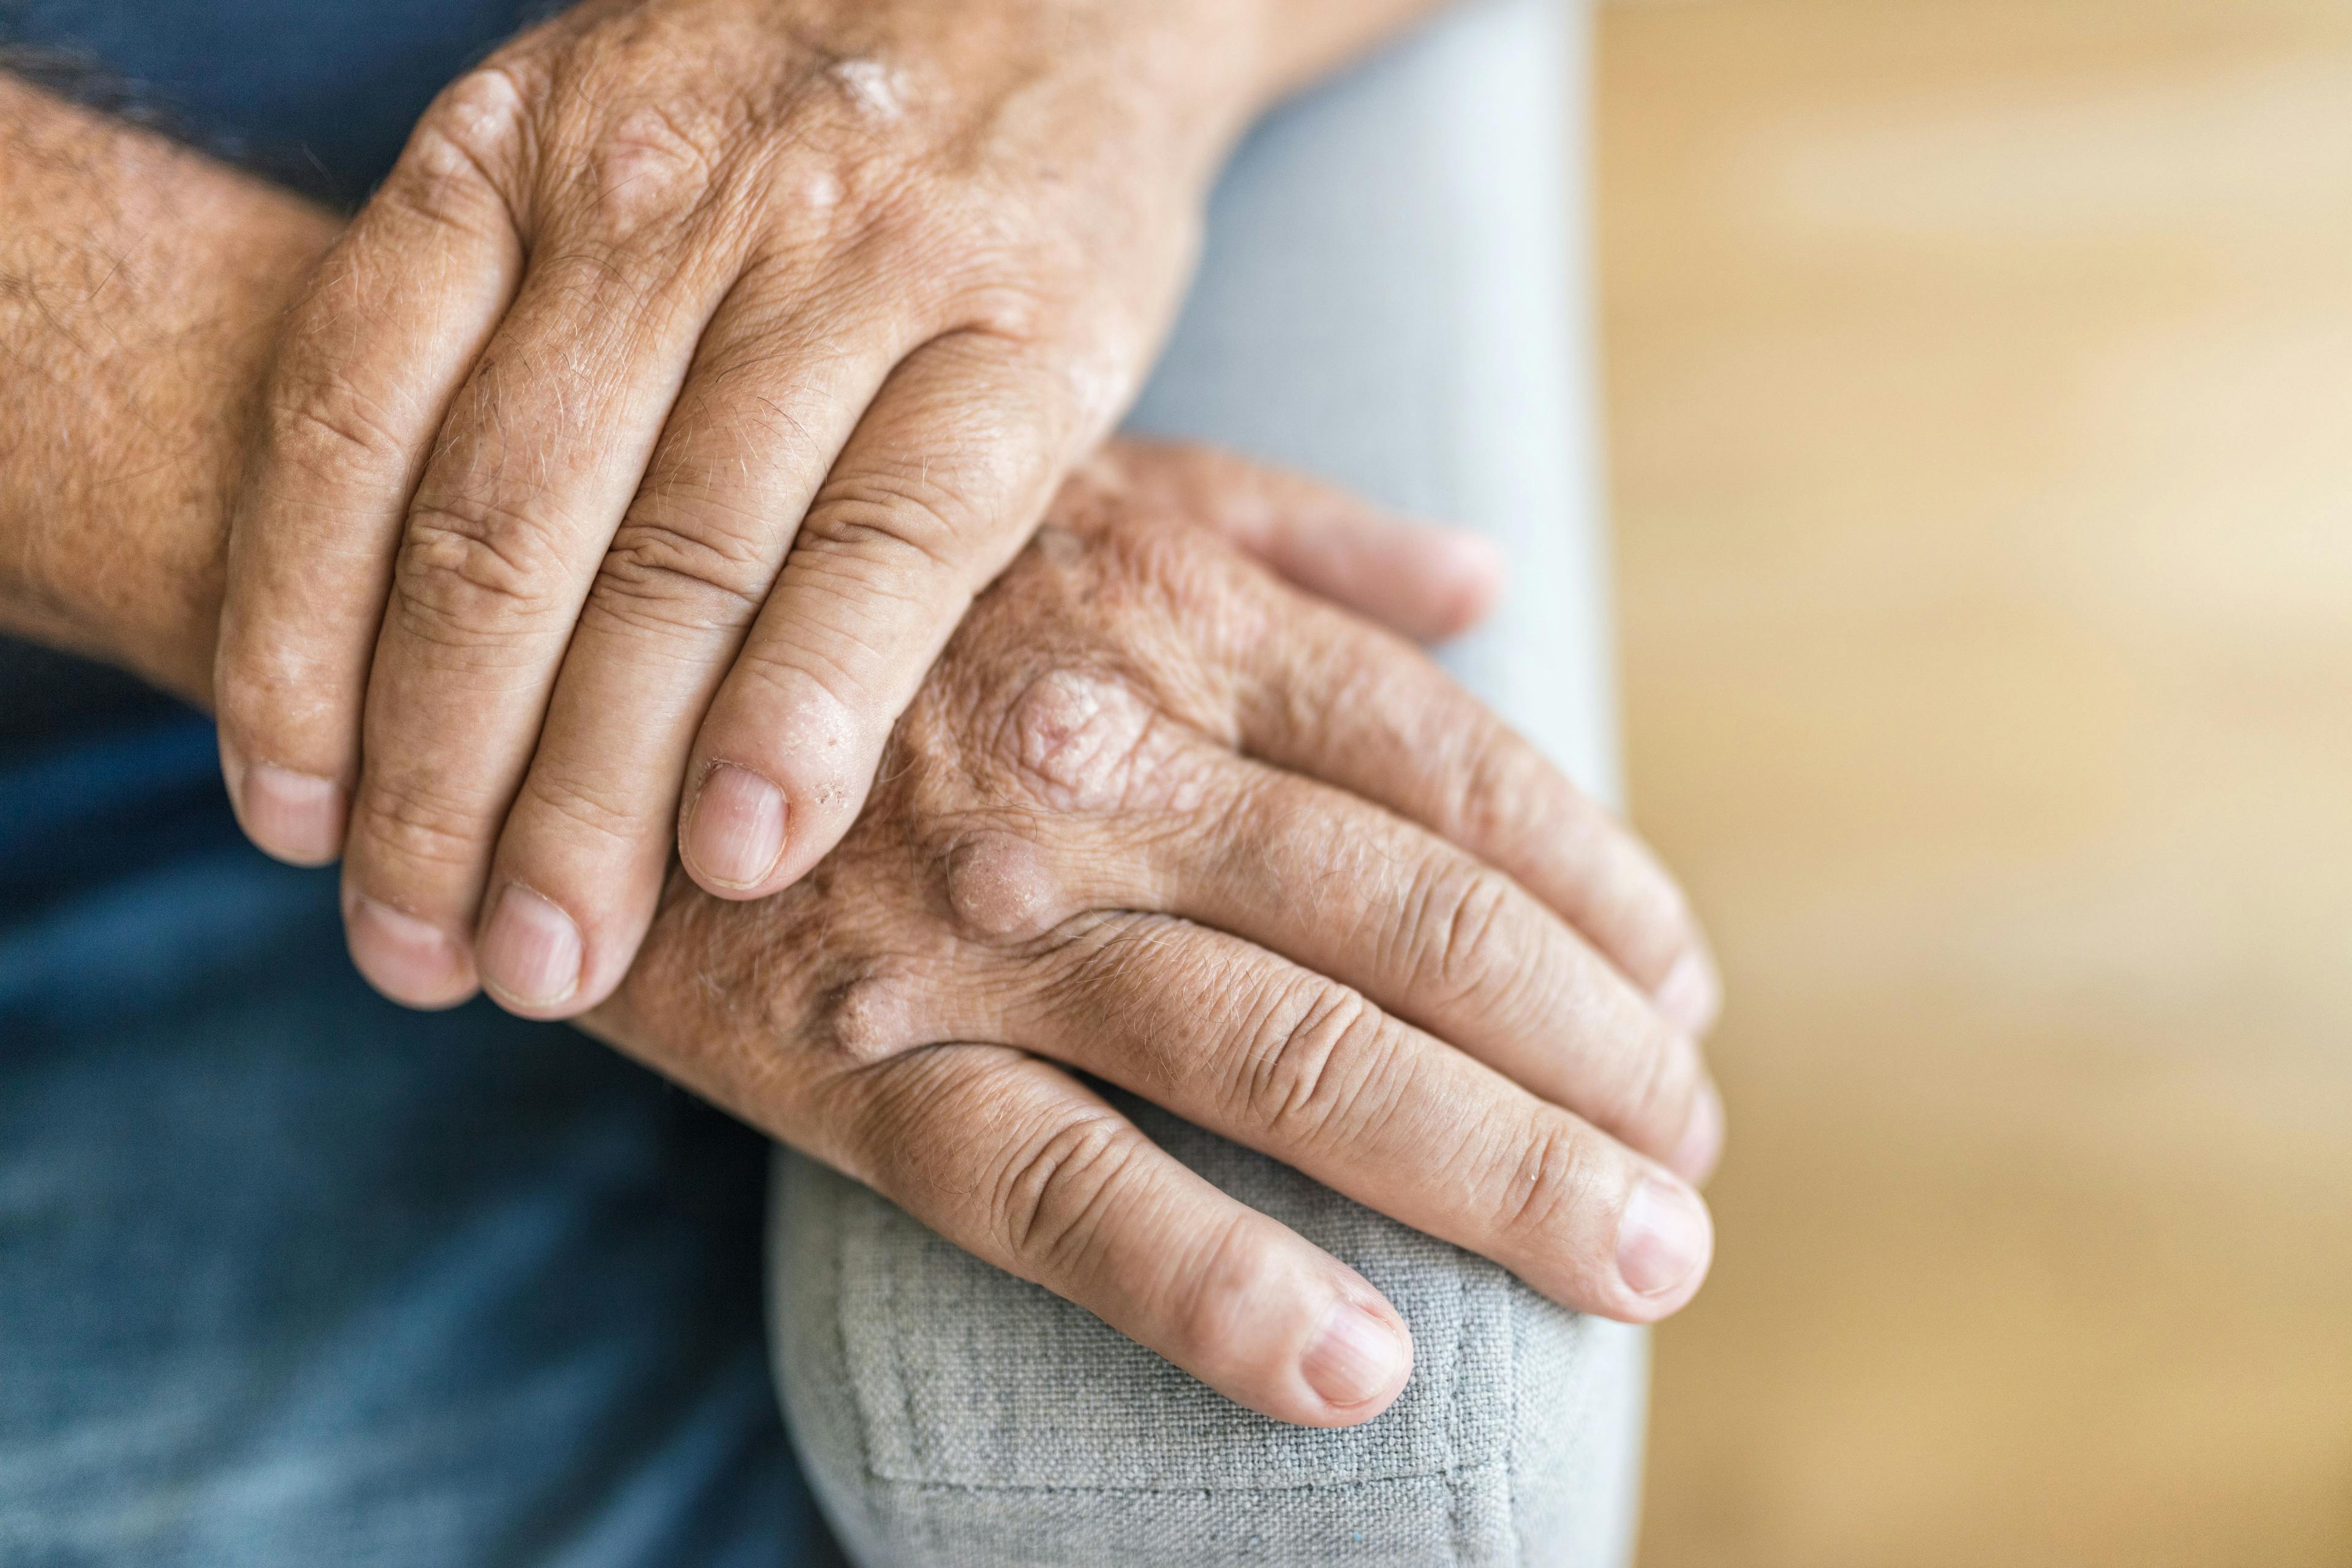 Elderly man suffering from psoriasis on hands | and.one - stock.adobe.com